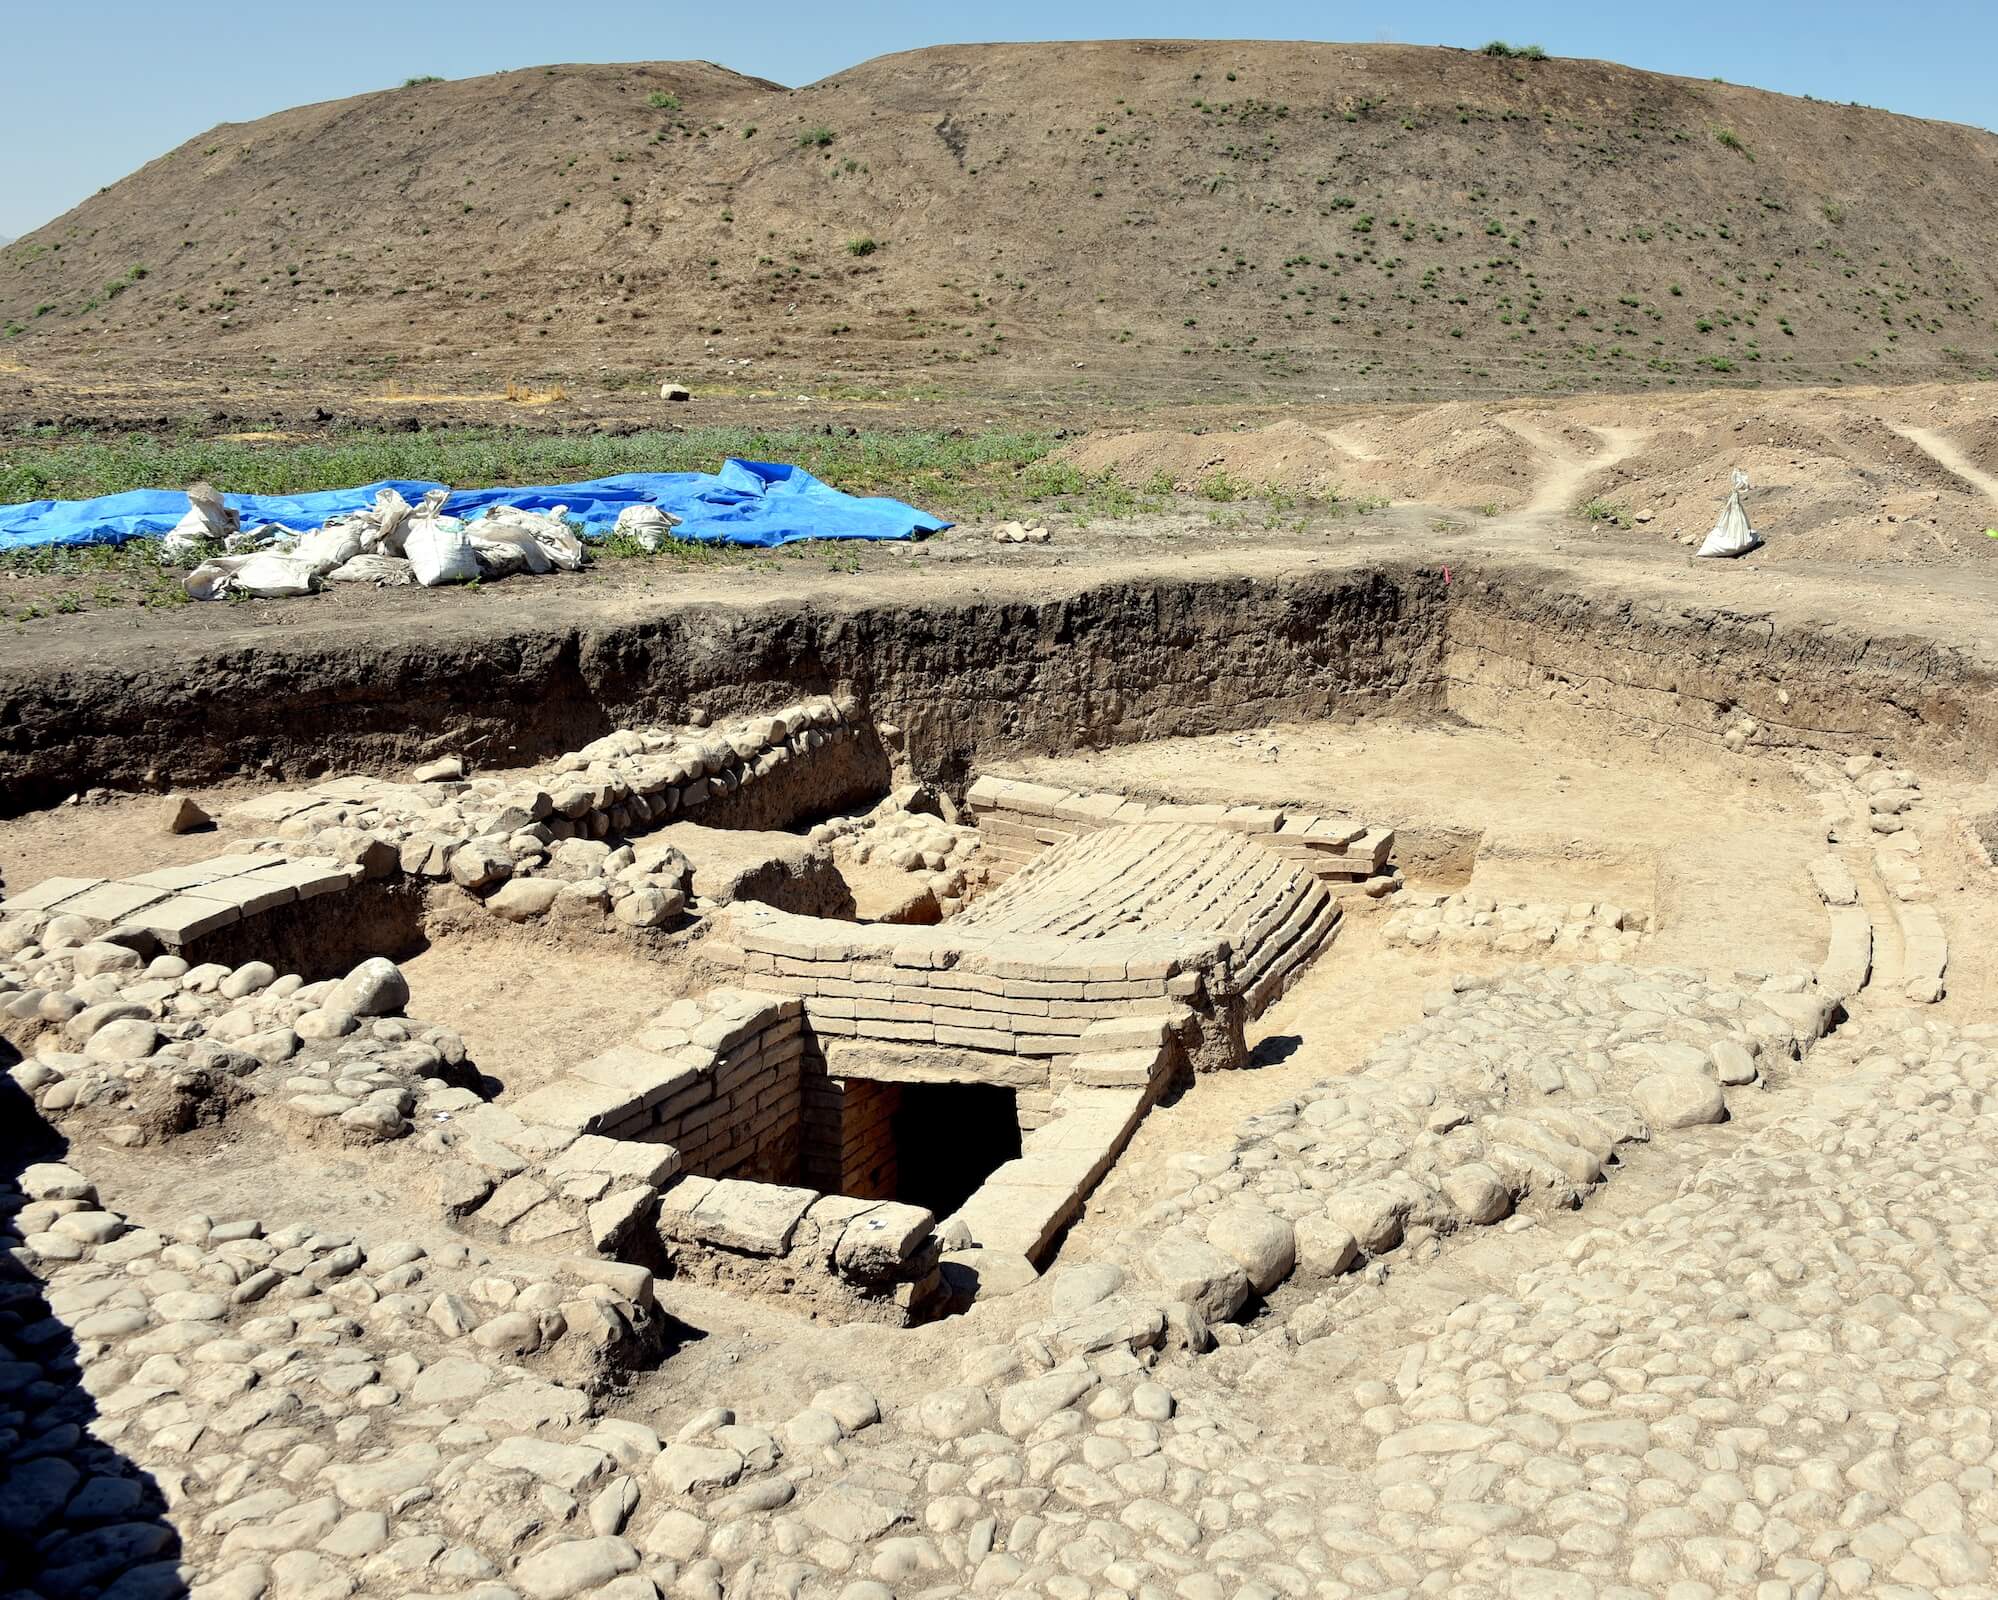 Example of a vaulted tomb at Yasin Tepe, Sualymaniayh, Shahrizor Plain, Iraq, 1st millennium BCE. Tombs like these often held more than one household member and were meant to be accessible to the living family, either to bring offerings down to the deceased or to bury another member. Photo: Osama Shukir Muhammed Amin FRCP (Glasg), CC BY-SA 4.0, via Wikimedia Commons (https://commons.wikimedia.org/wiki/File:1st-millennium_BCE_grave_at_Yasin_Tepe,_Shahrizor_Plain,_Sulaymaniyah_Governorate,_Iraqi_Kurdistan.jpg)